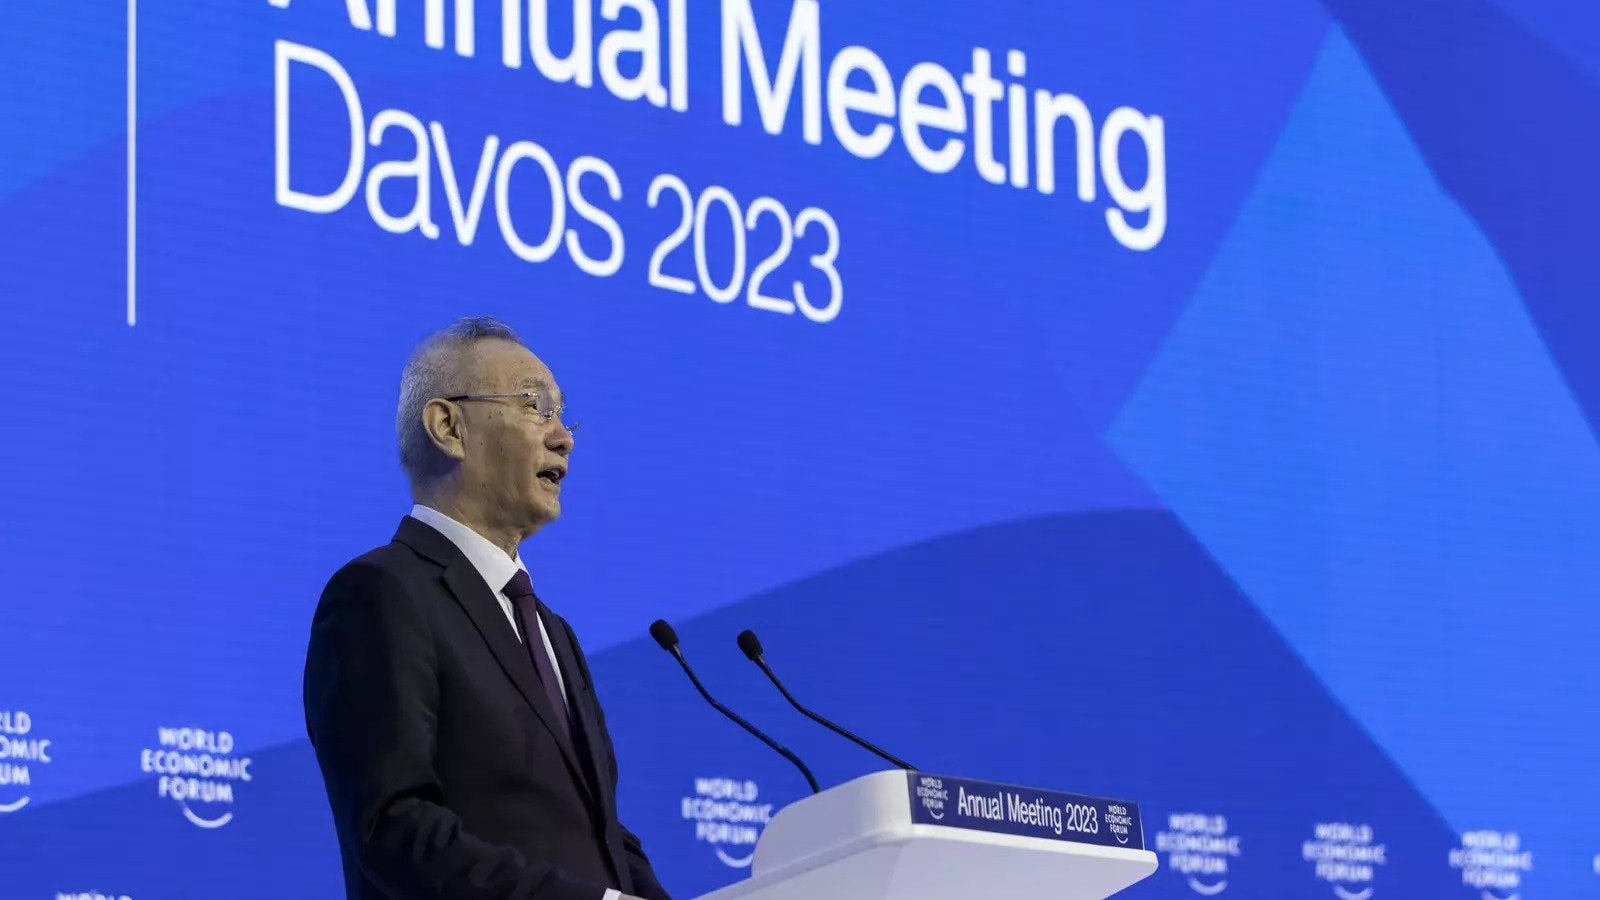 China’s reopening announcement at Davos comes at a time when luxury brands are hoping to win back consumers post-pandemic lockdowns. Meanwhile, the country faces a looming crisis due to population shrinkage. Photo: World Economic Forum/Faruk Pinjo